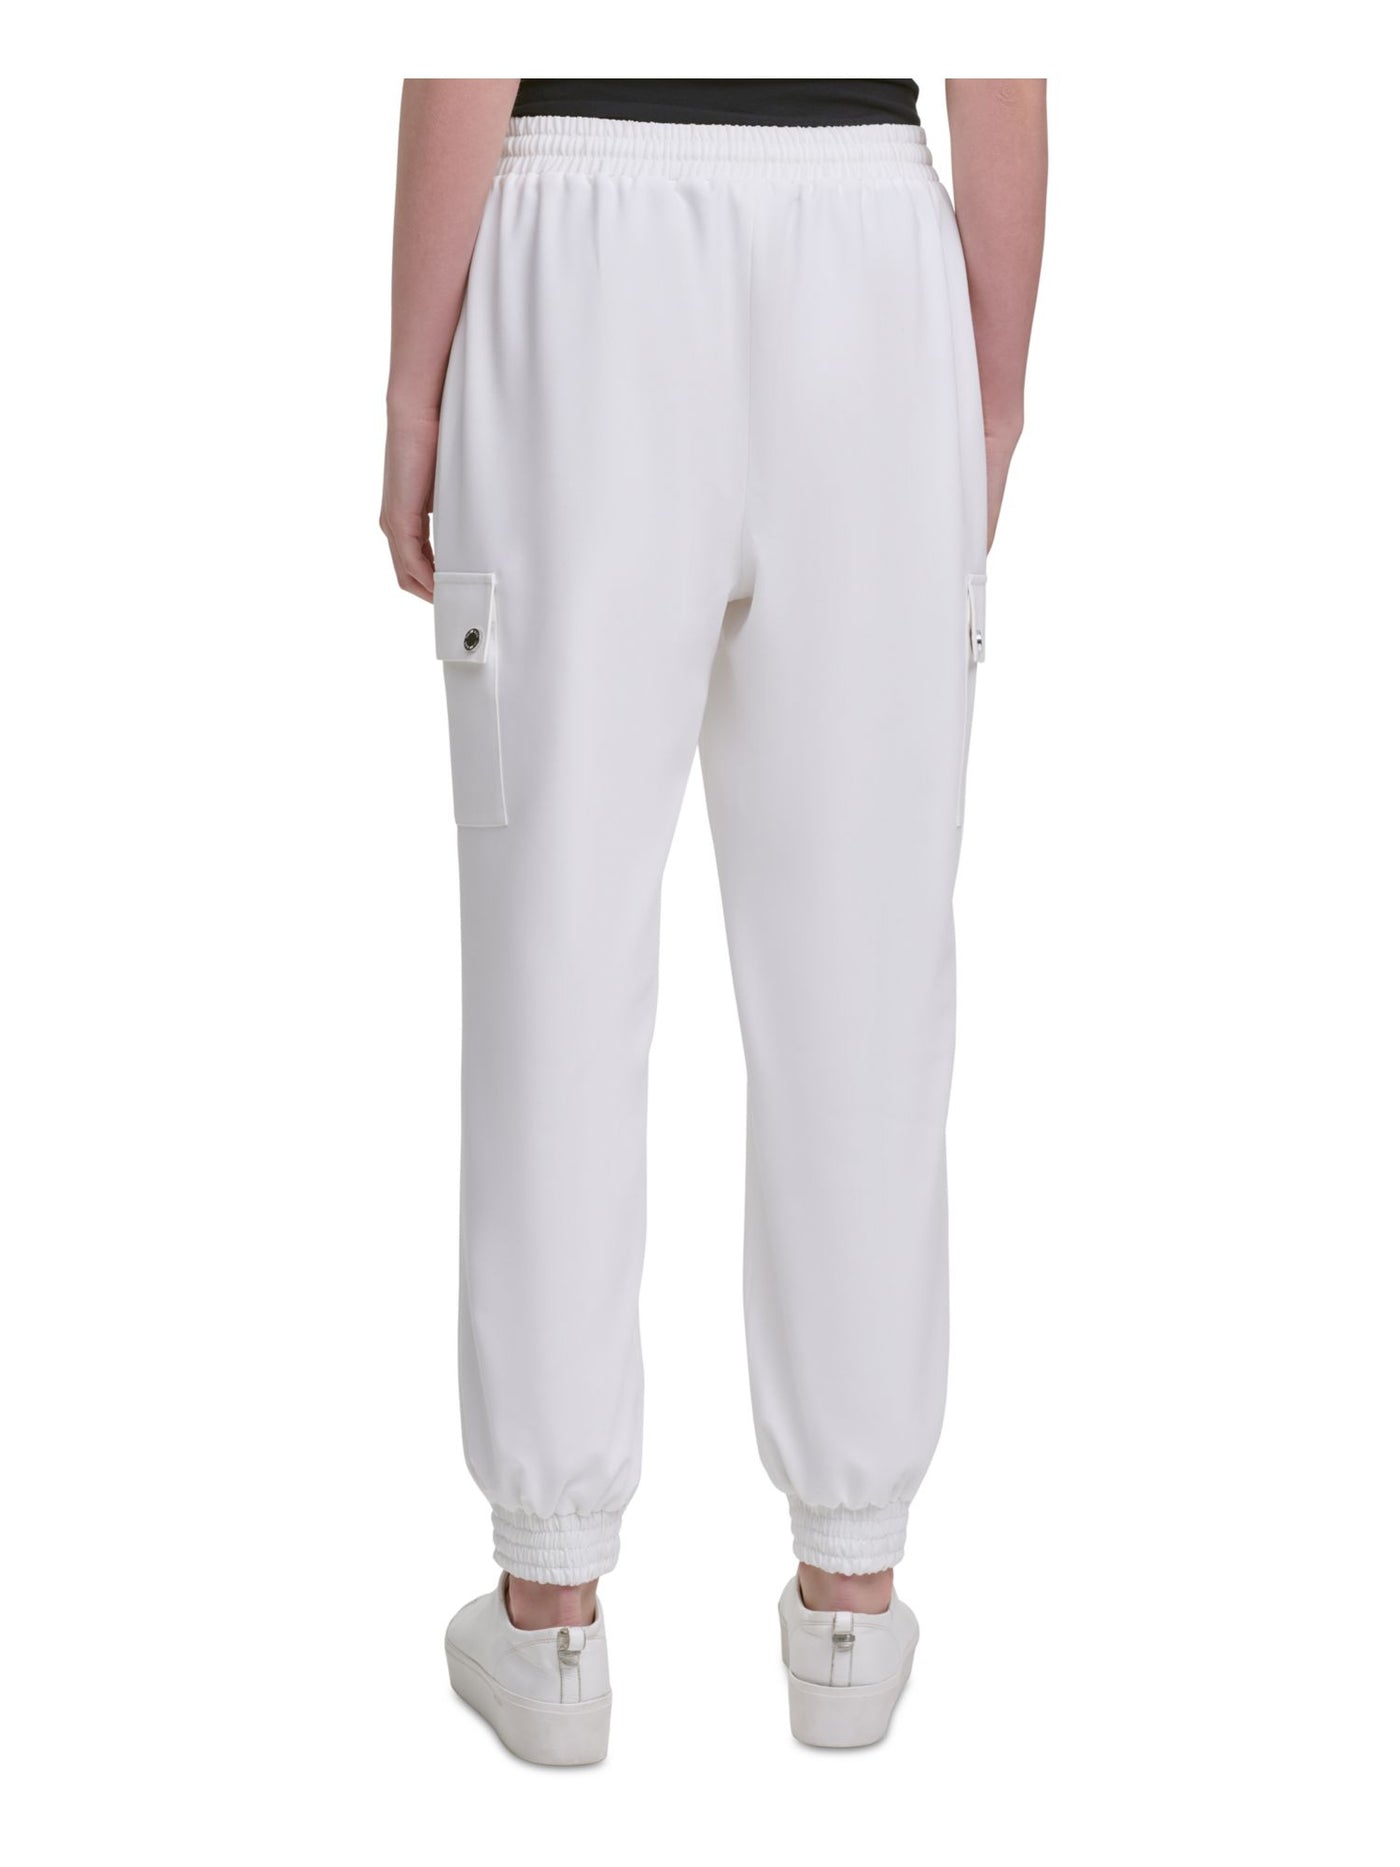 CALVIN KLEIN Womens Ivory Pocketed Lounge Pants L